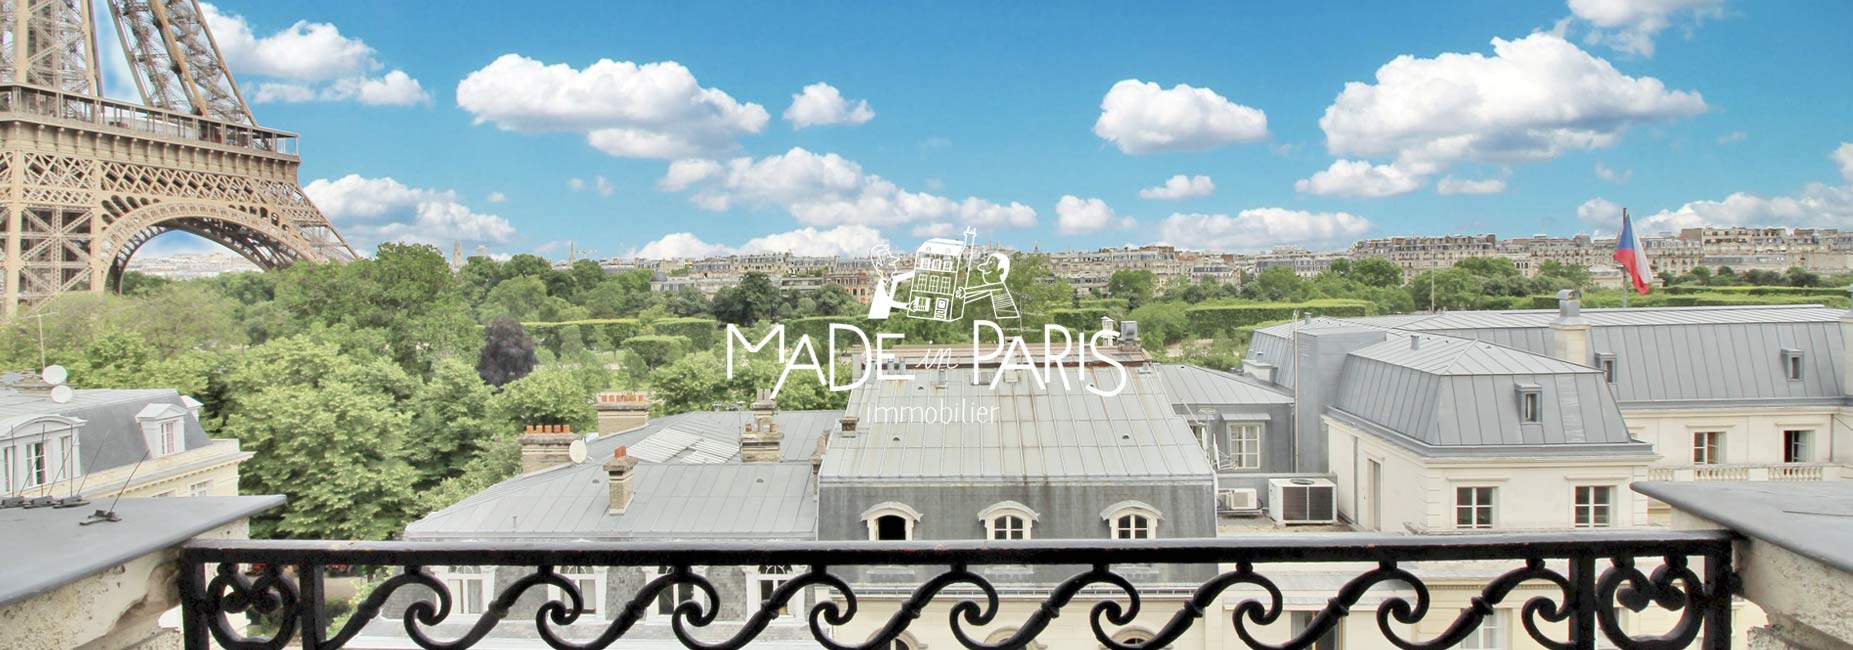 Made-in-Paris-immobilier-slider-agence-immobiliere-appartement-tour-eiffel